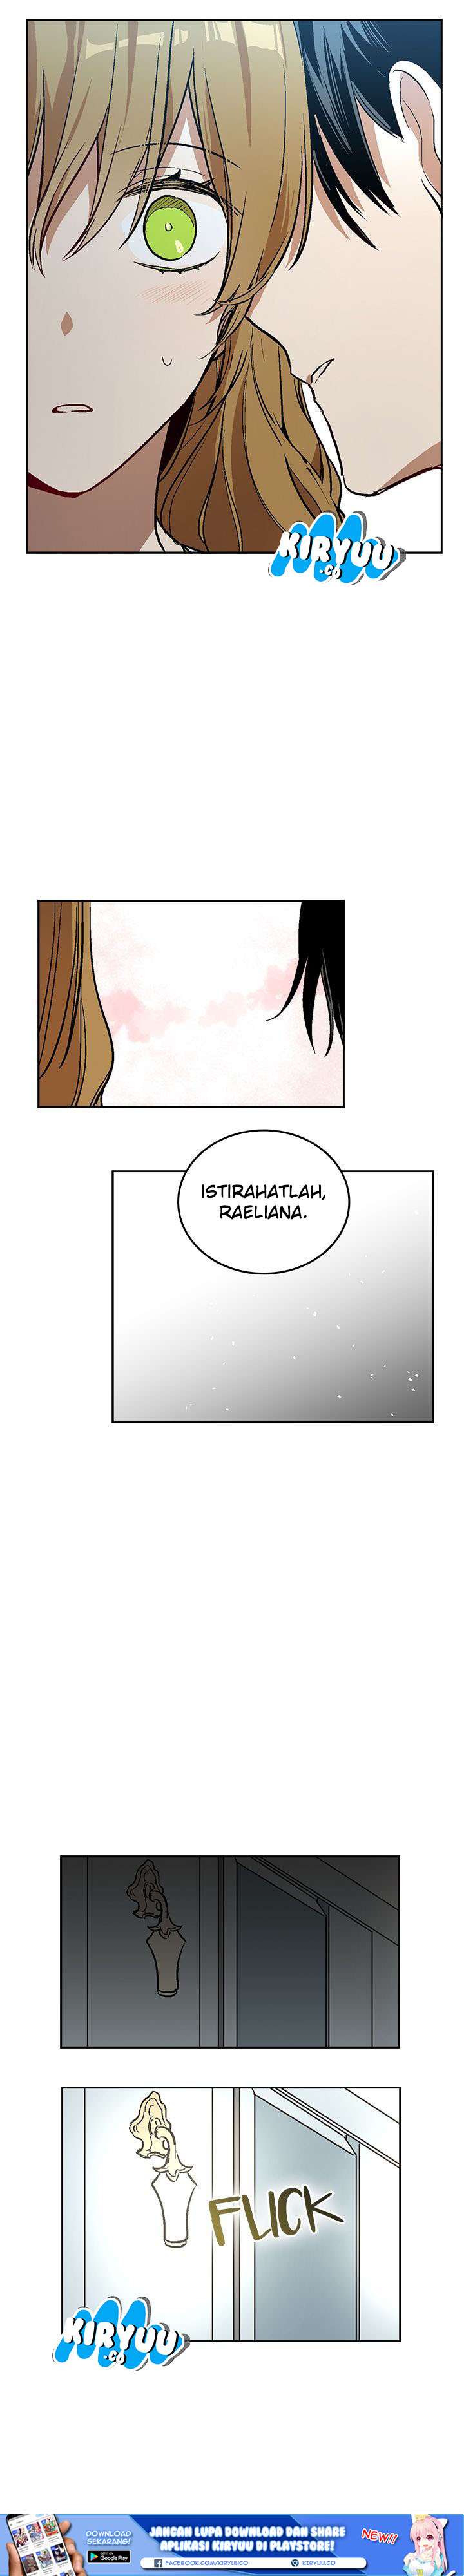 The Reason Why Raeliana Ended Up at the Duke’s Mansion Chapter 42 Bahasa Indonesia